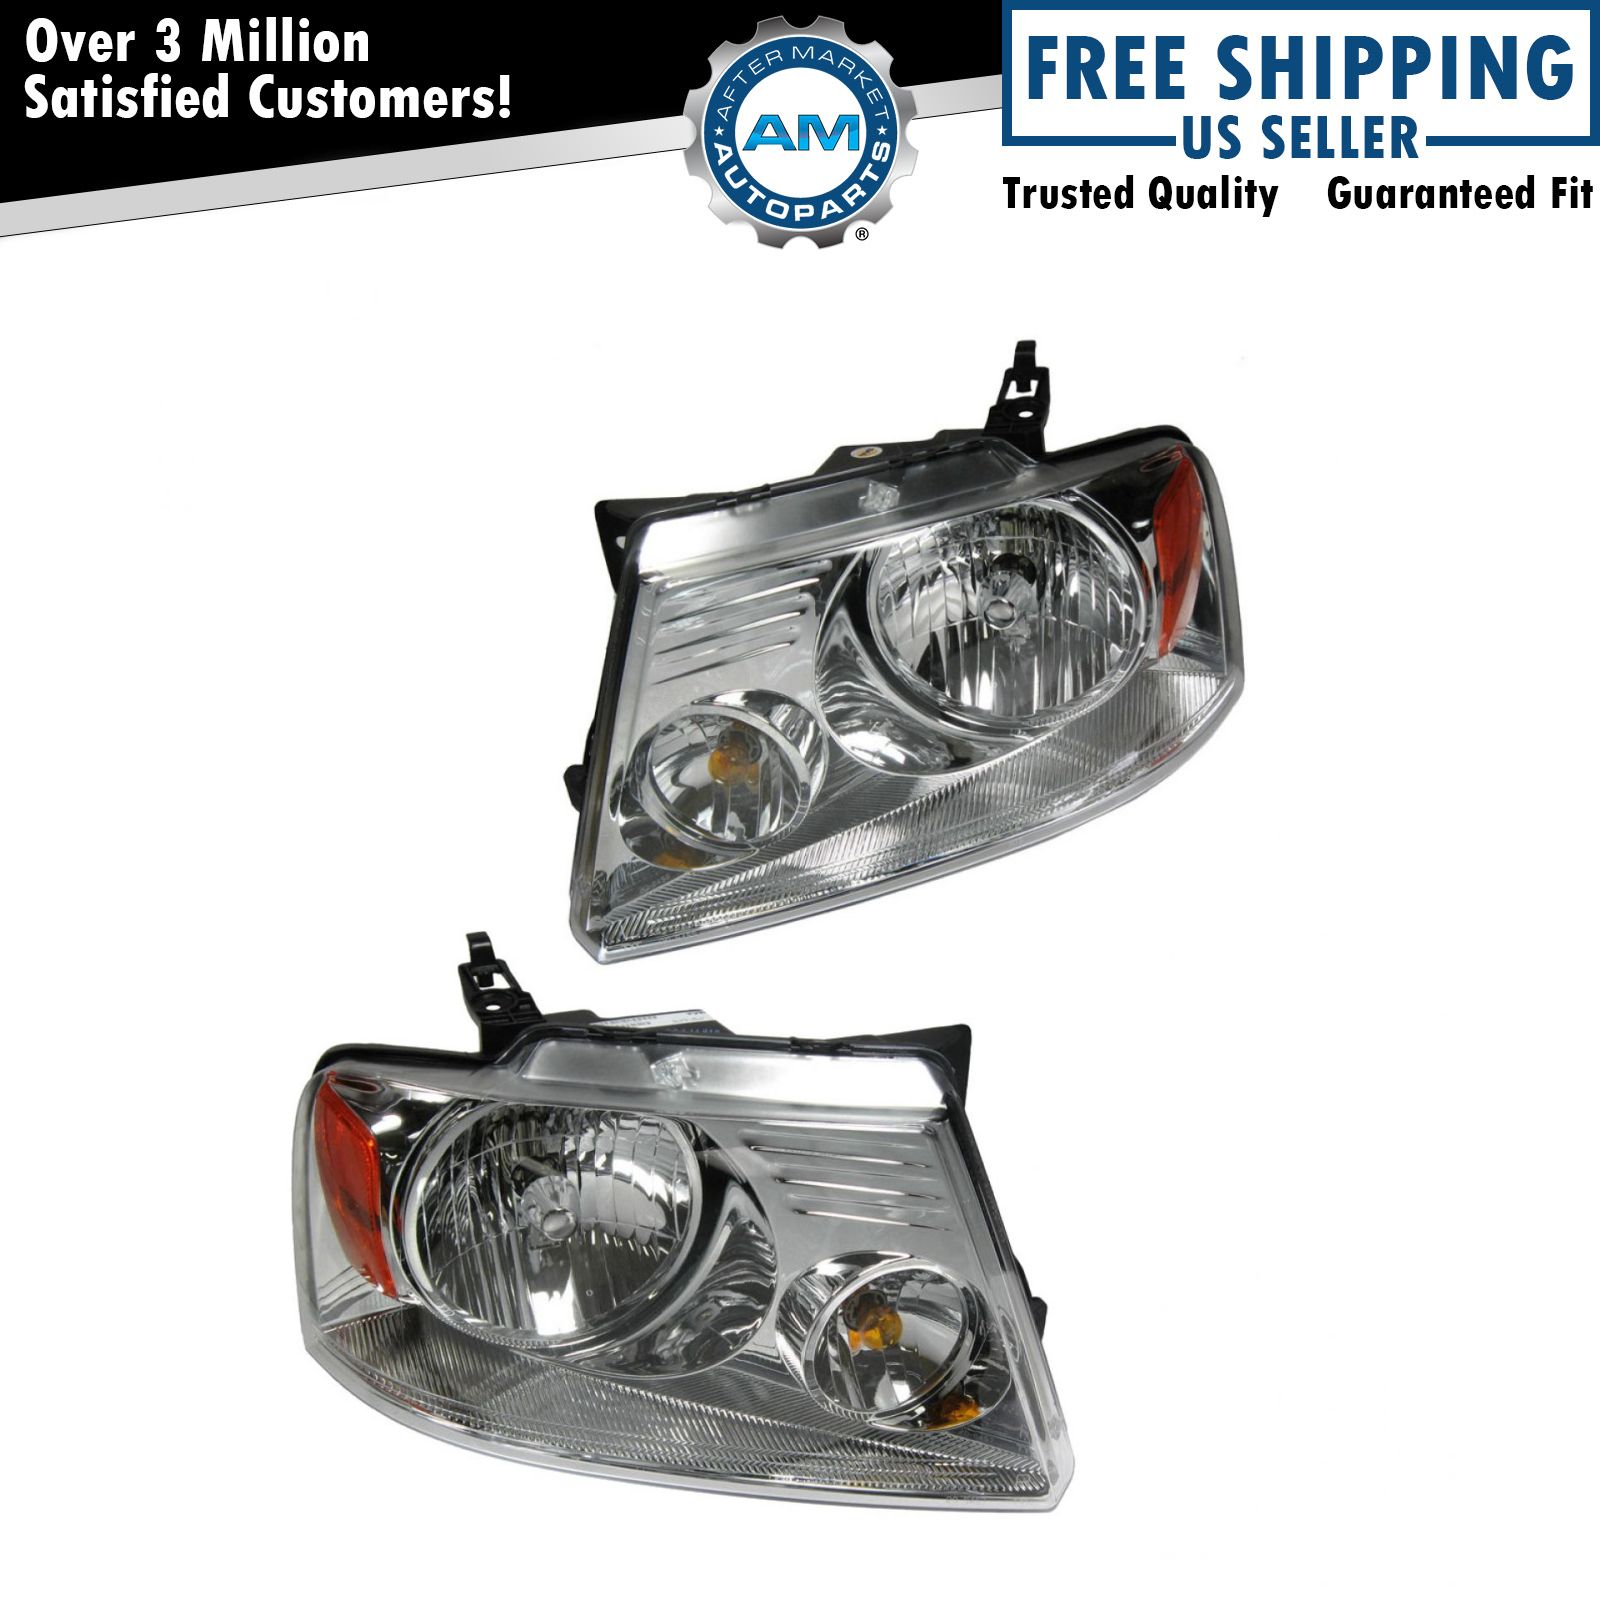 Headlights Headlamps Left & Right Set Pair For 2004-2008 Ford F-150 F150